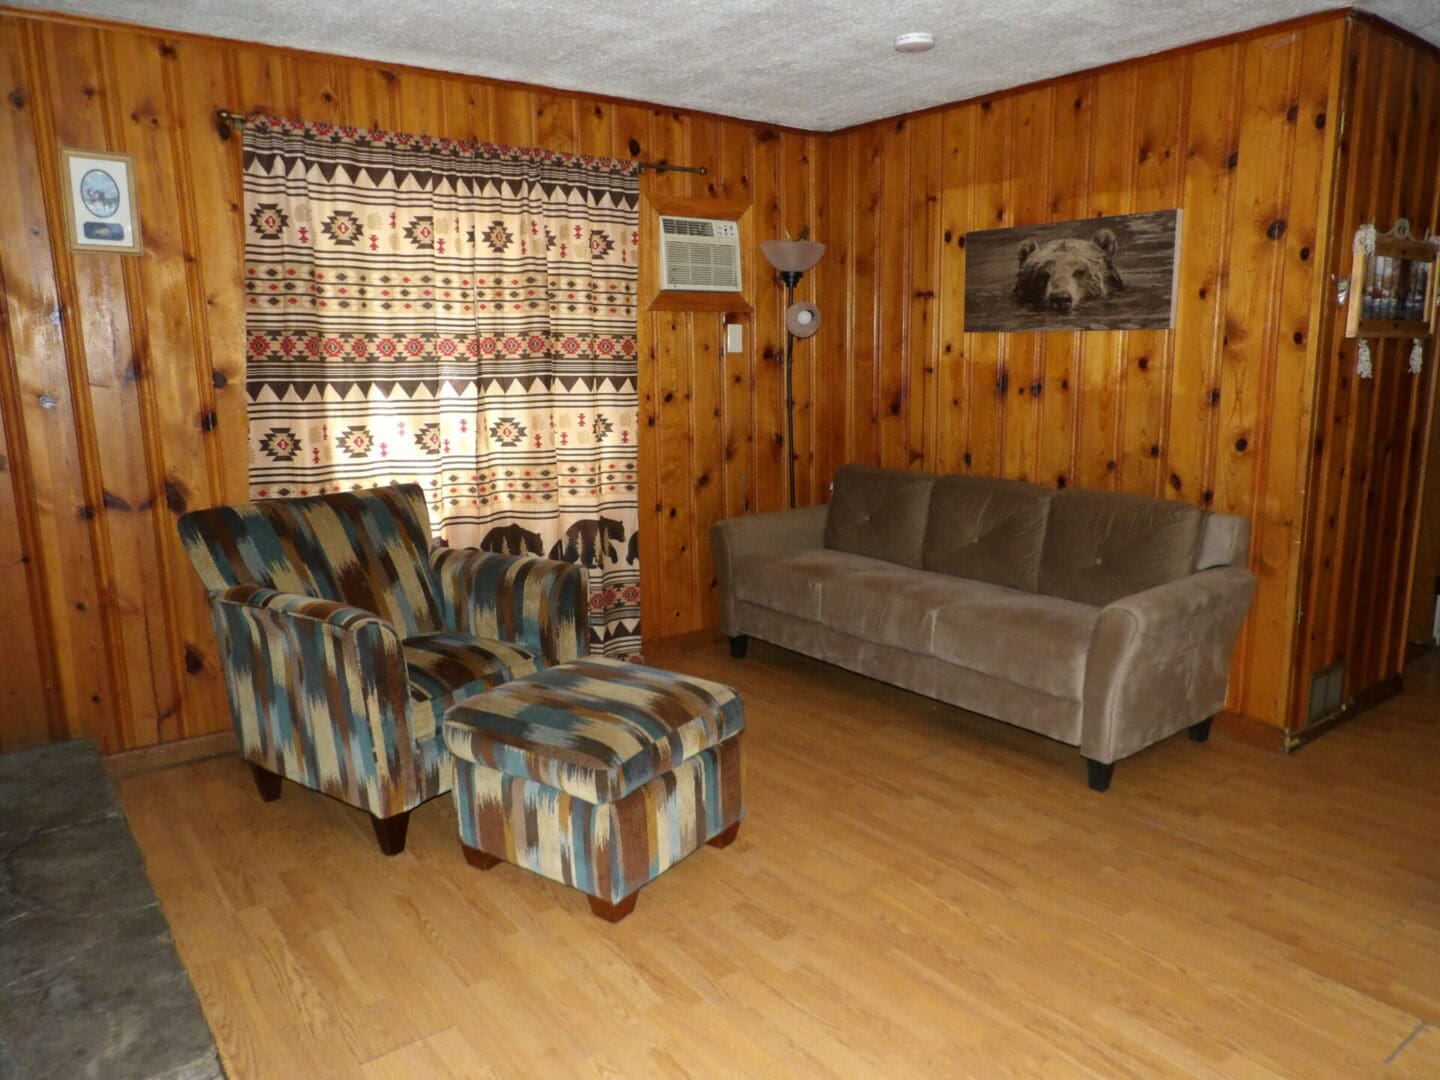 A living room with wood paneling and wooden floors.